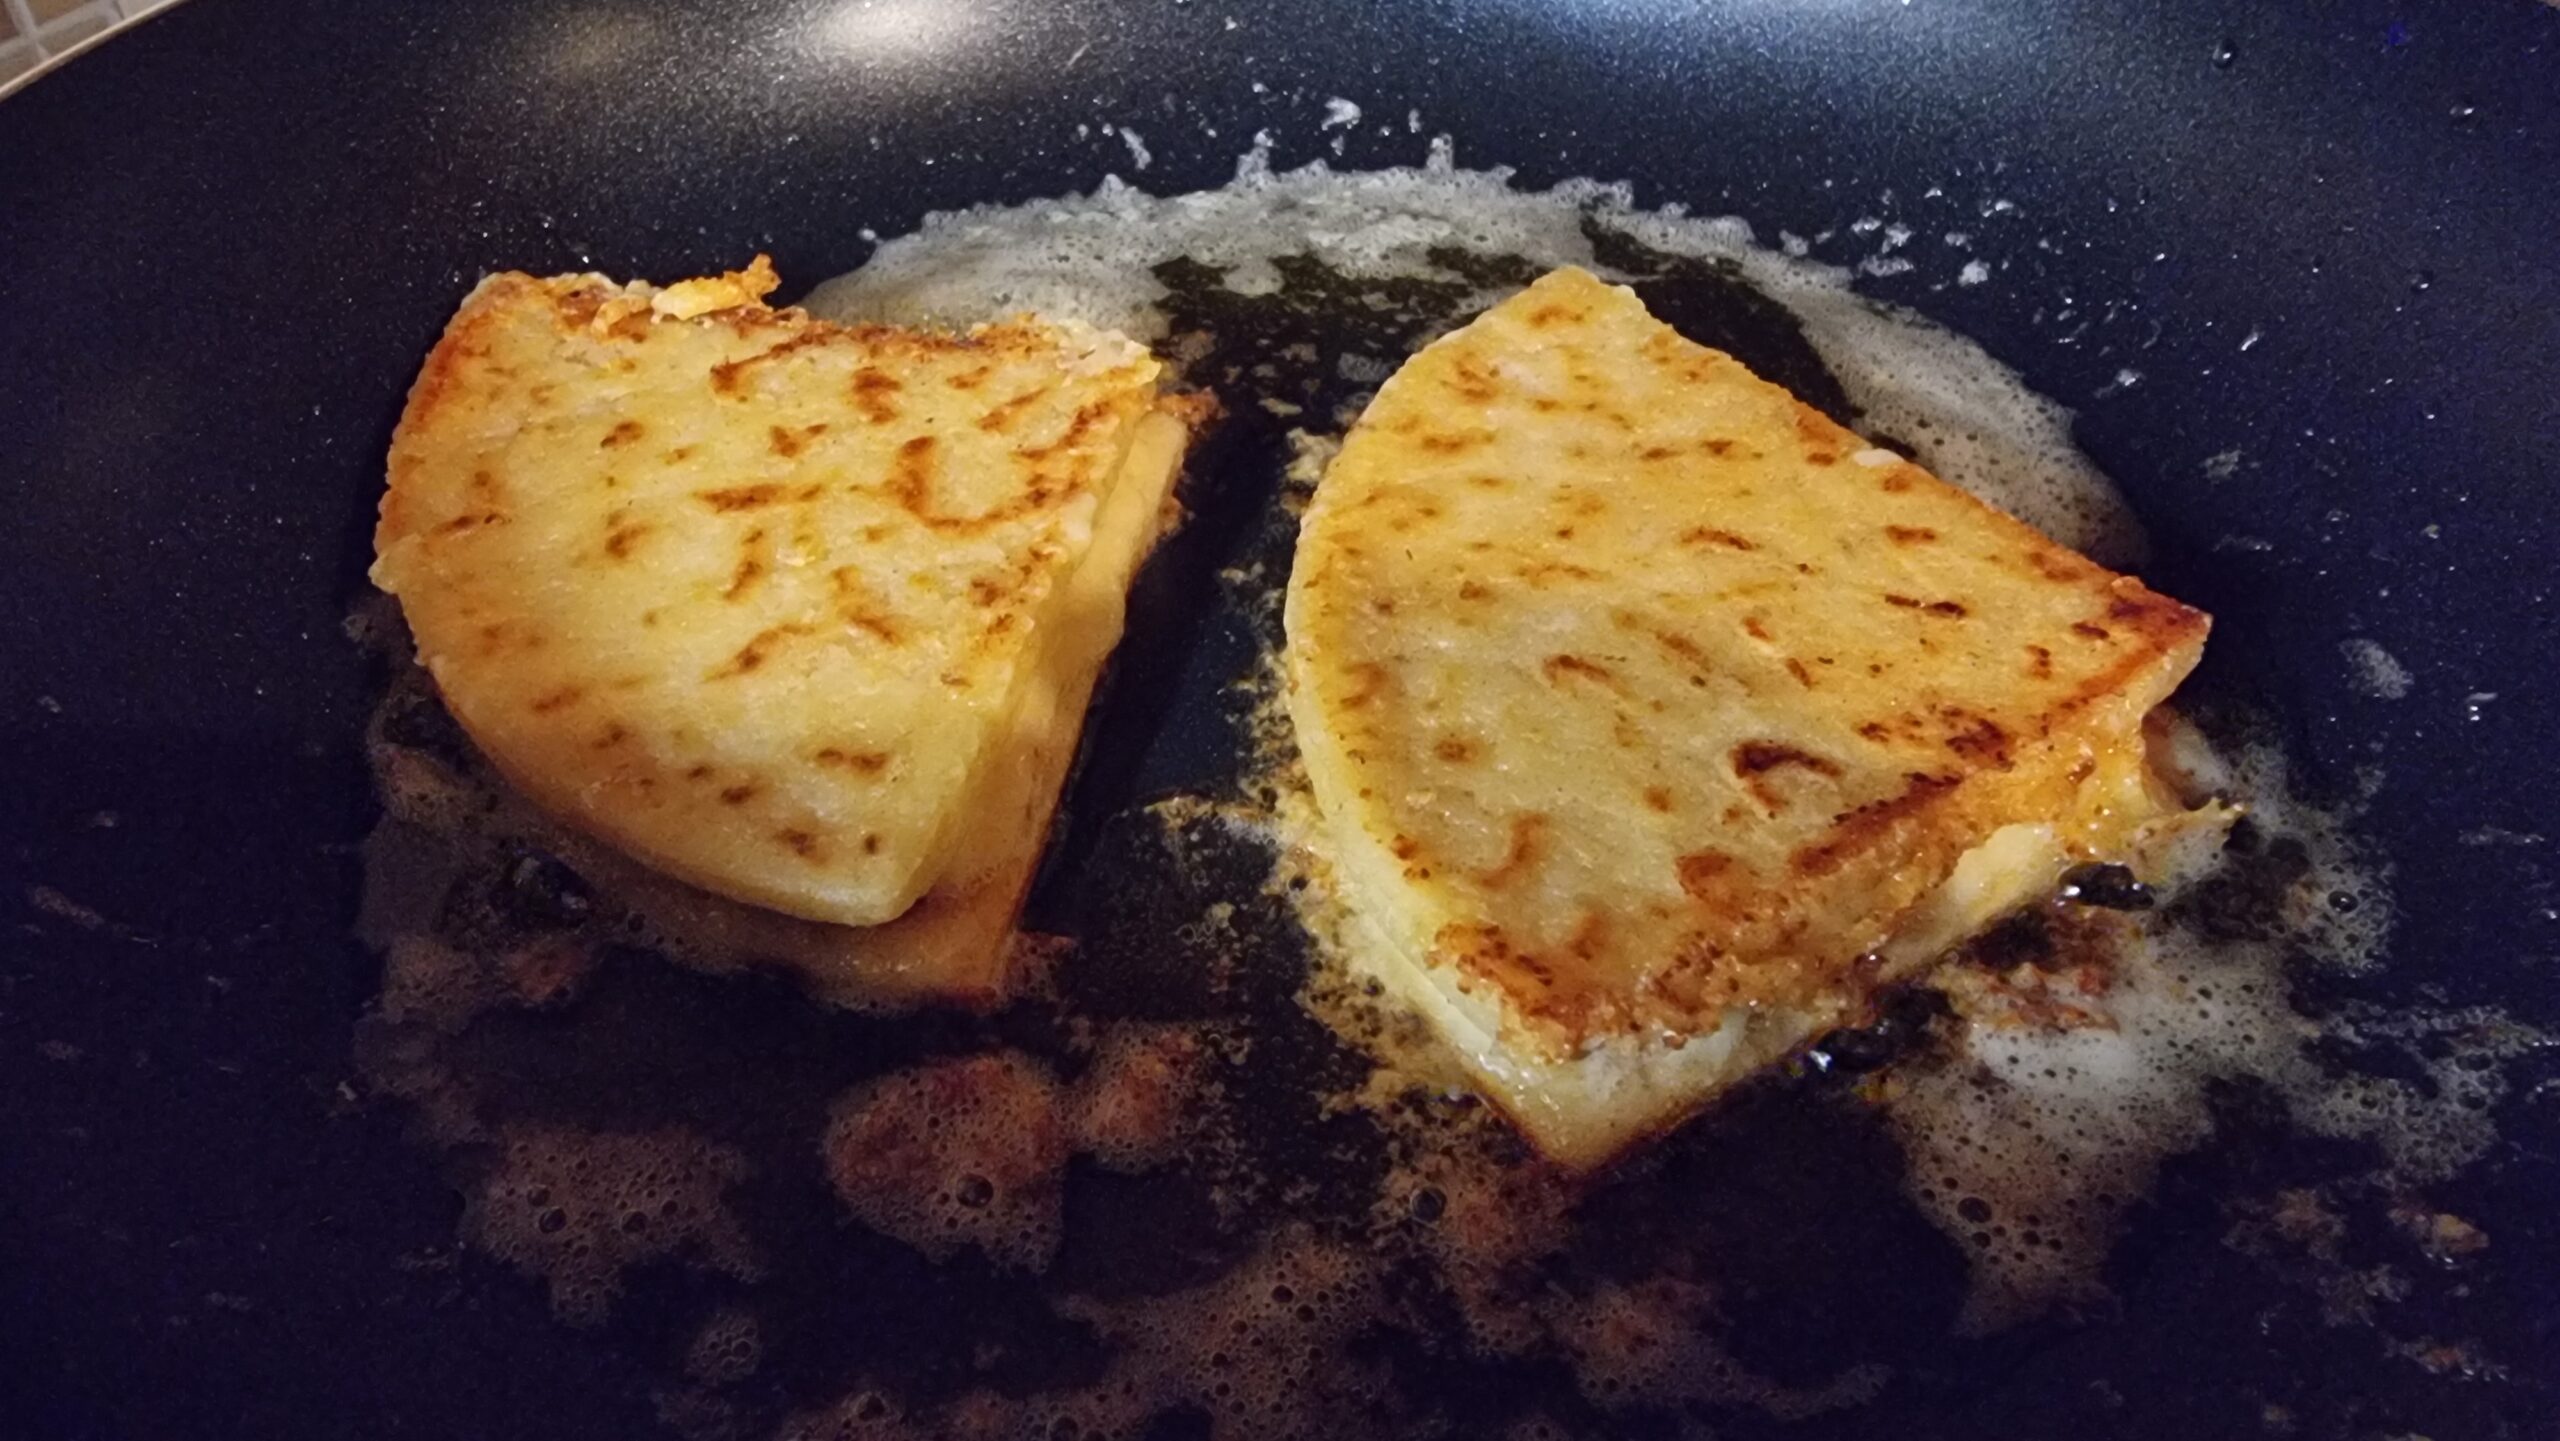 A pair of tattie scone quesadillas sizzling in a pan.